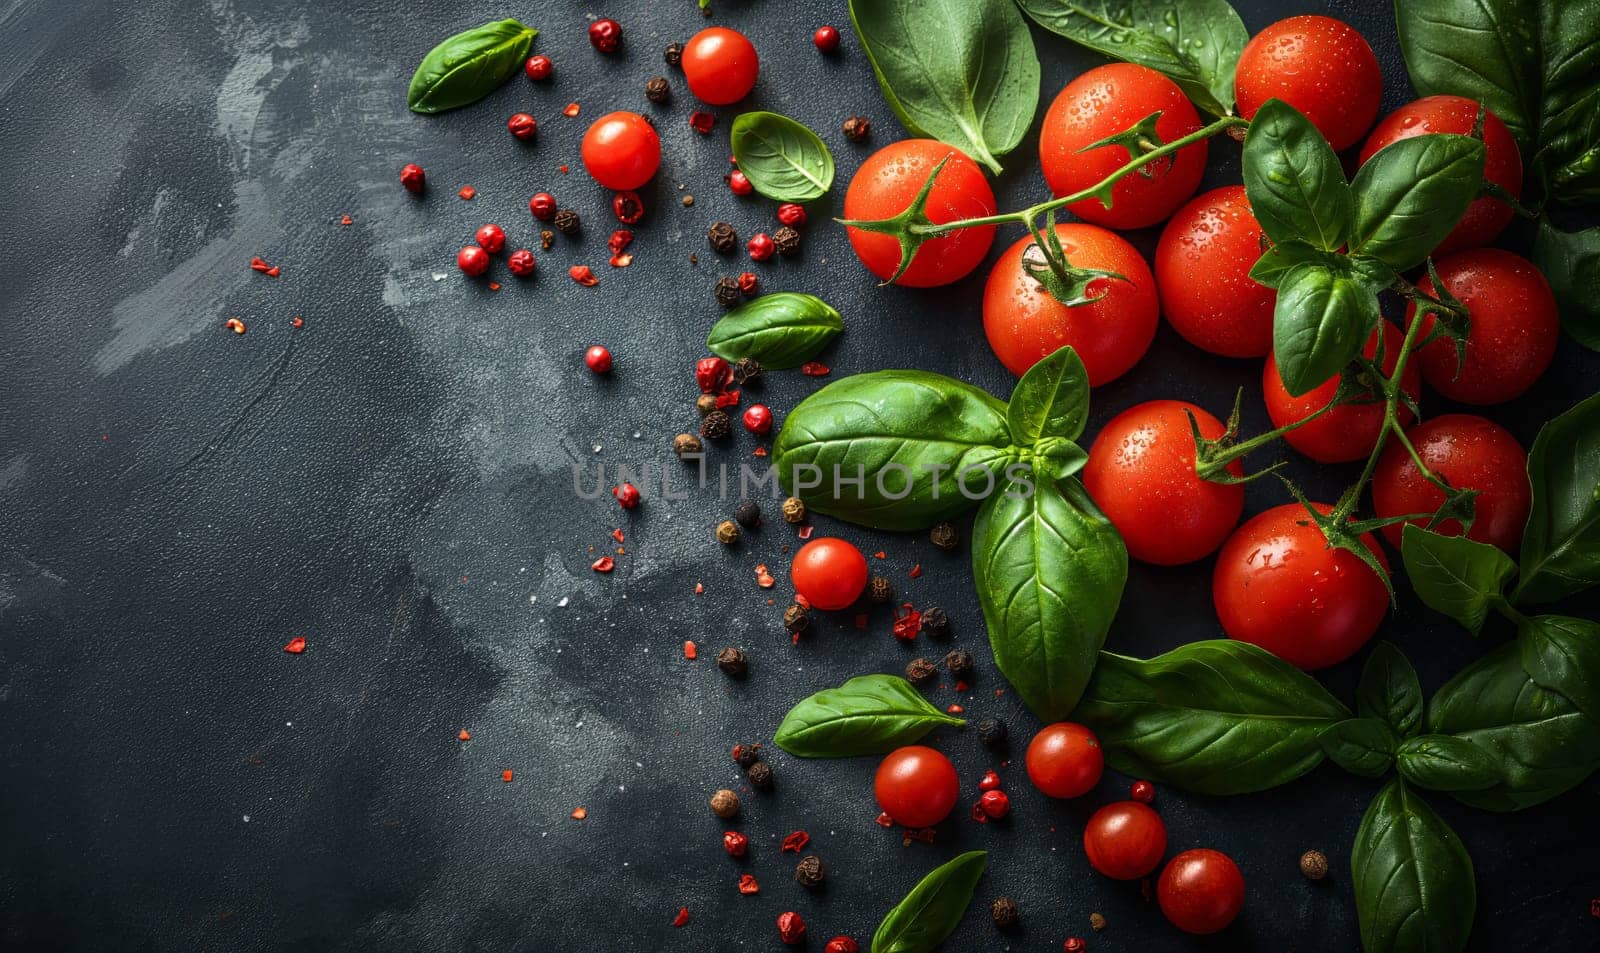 A variety of tomatoes and fresh basil leaves arranged on a wooden table.